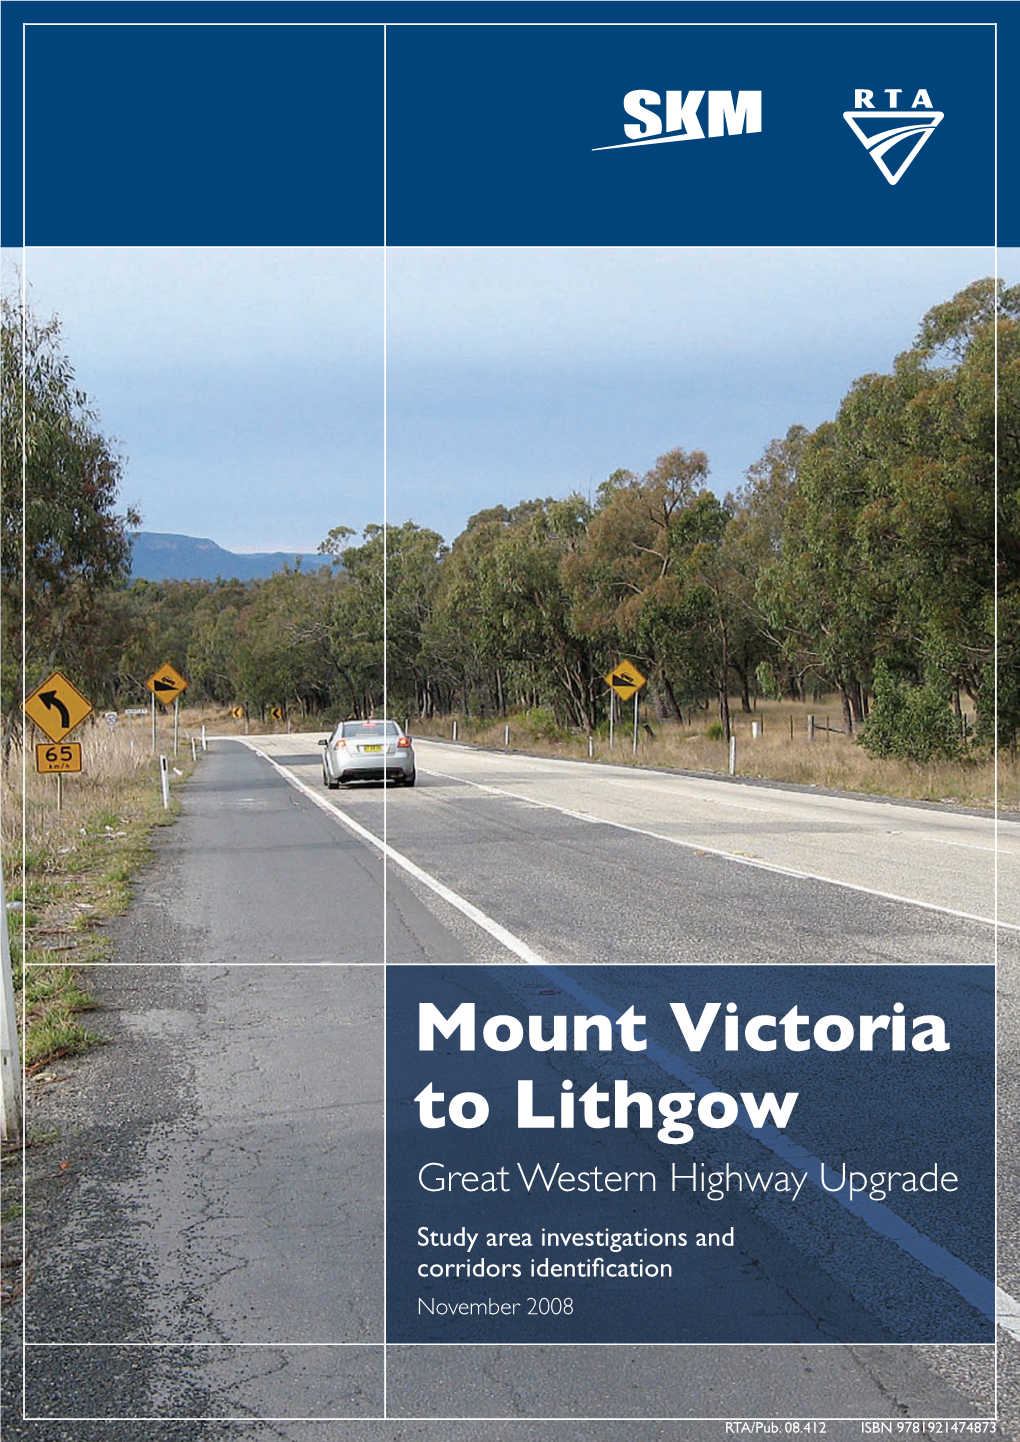 Mount Victoria to Lithgow Great Western Highway Upgrade Study Area Investigations and Corridors Identification November 2008